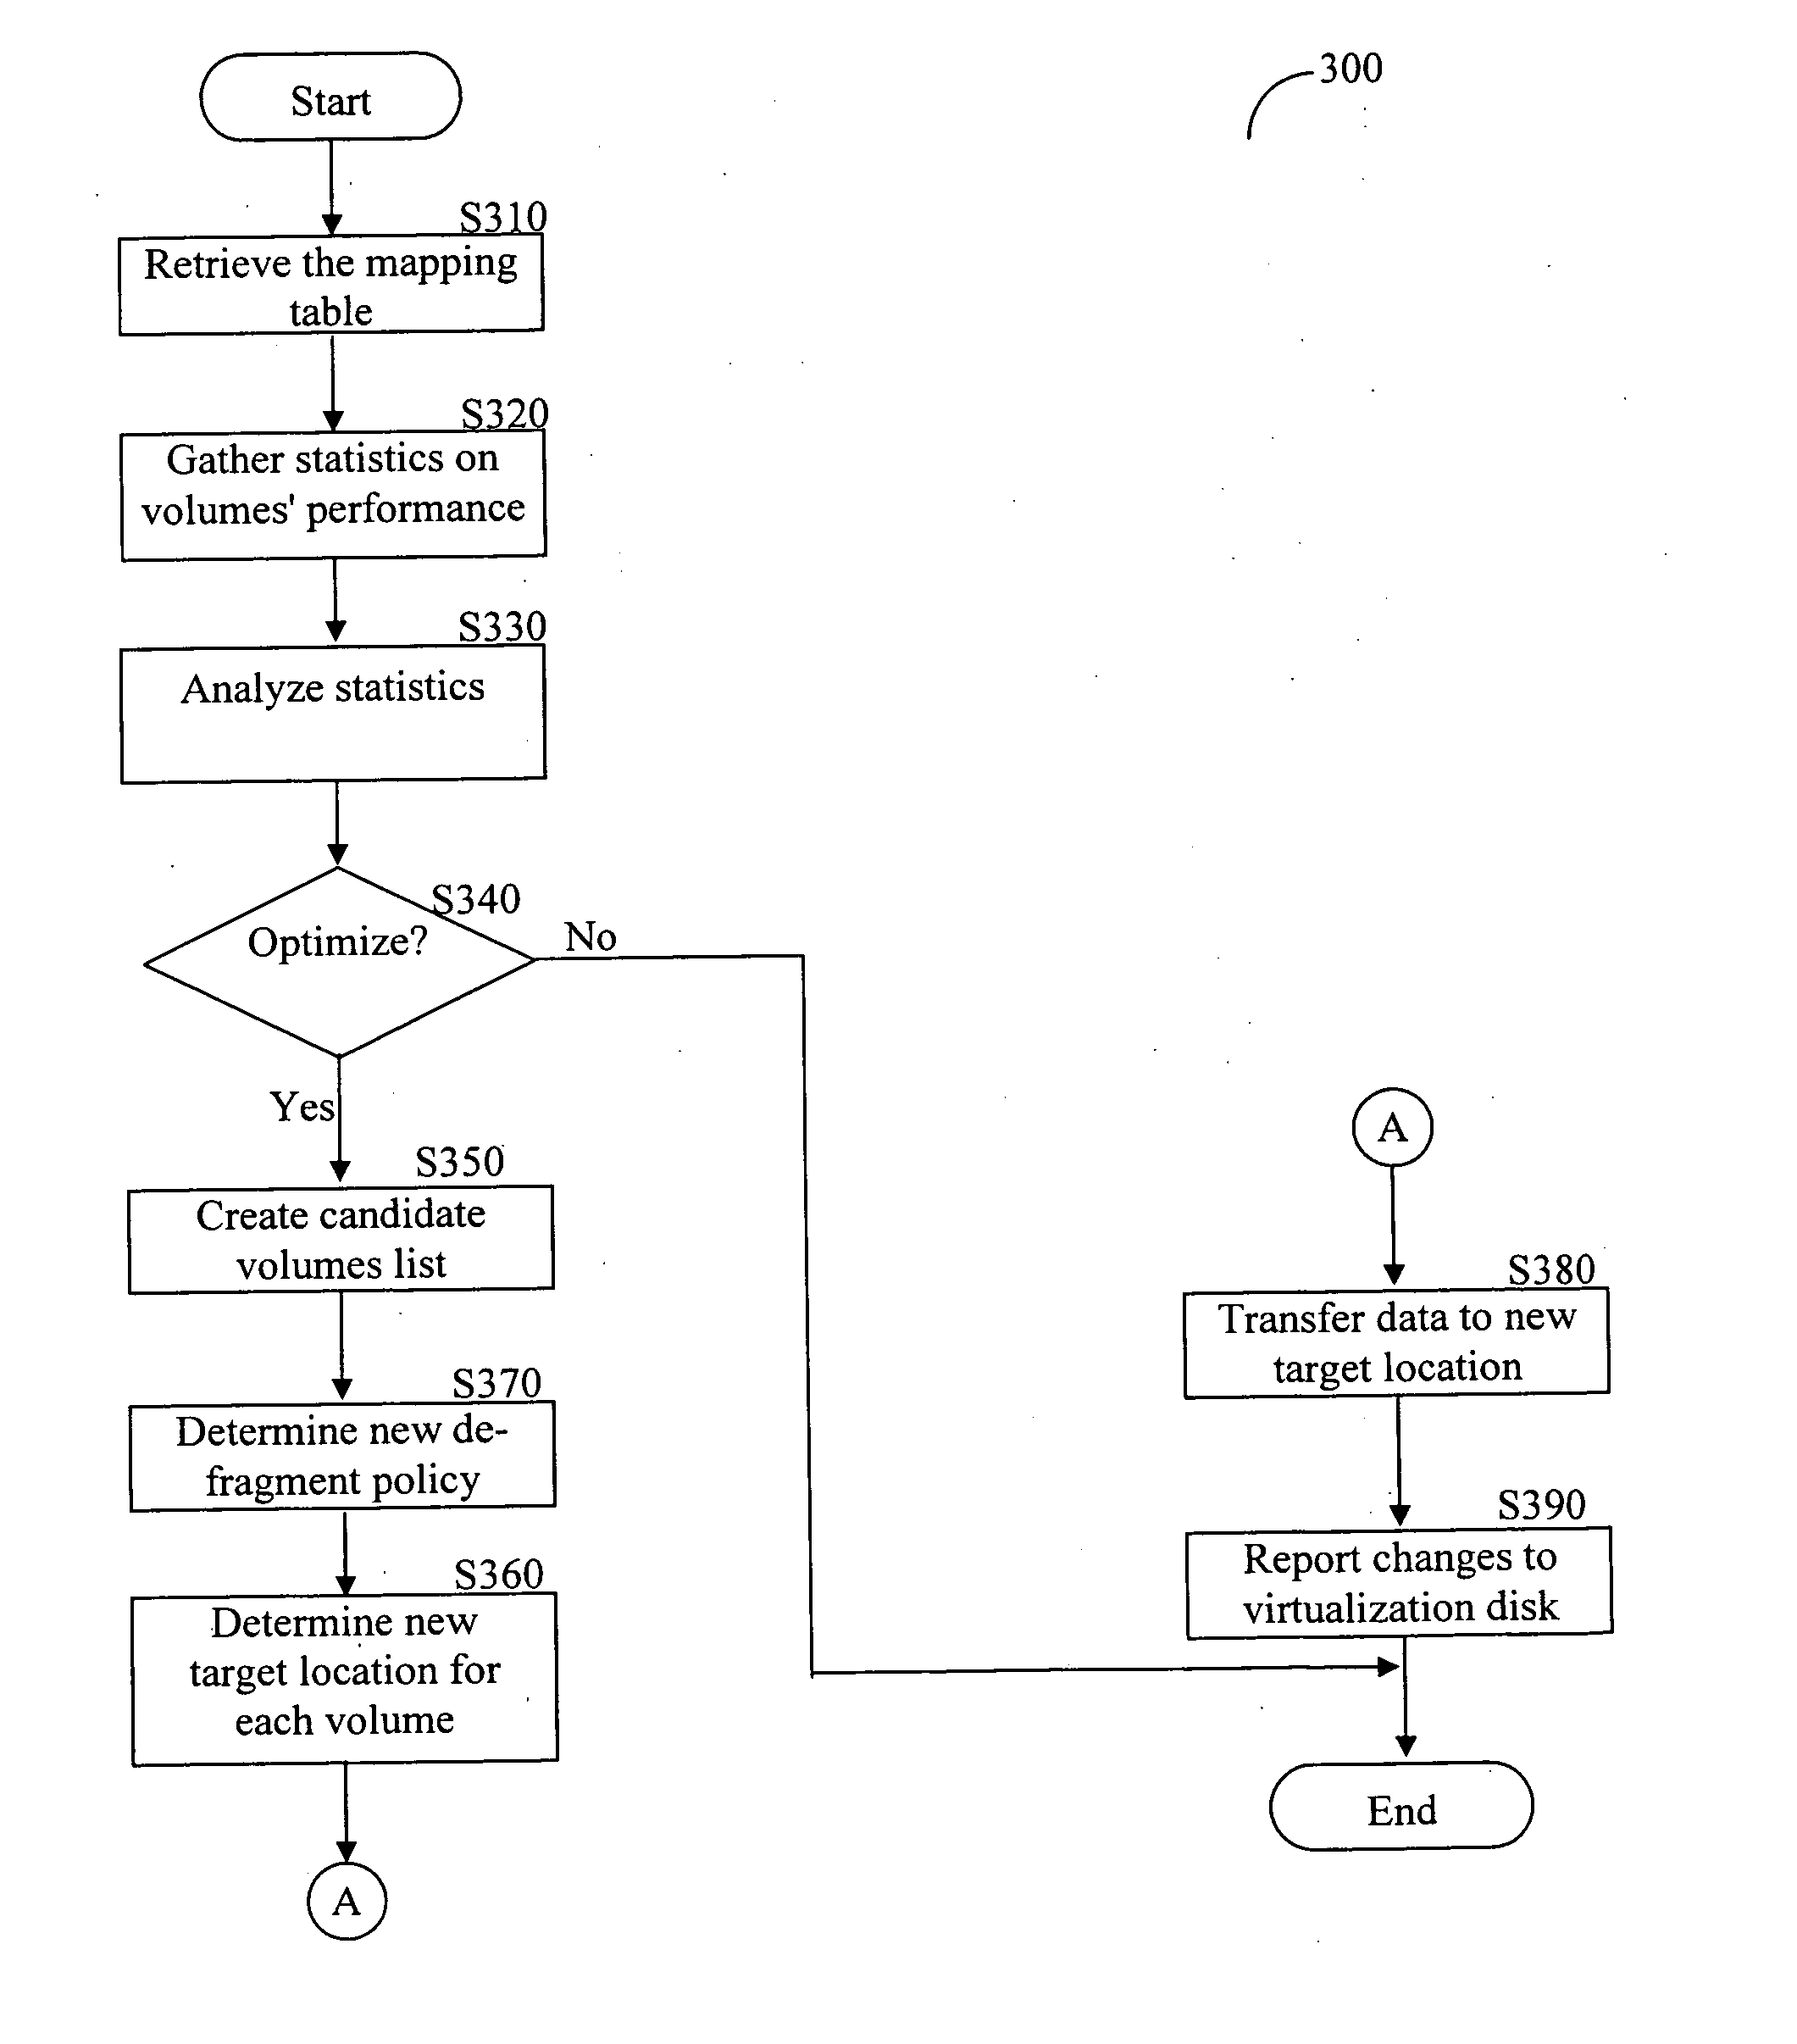 Method for defragmenting of virtual volumes in a storage area network (SAN)